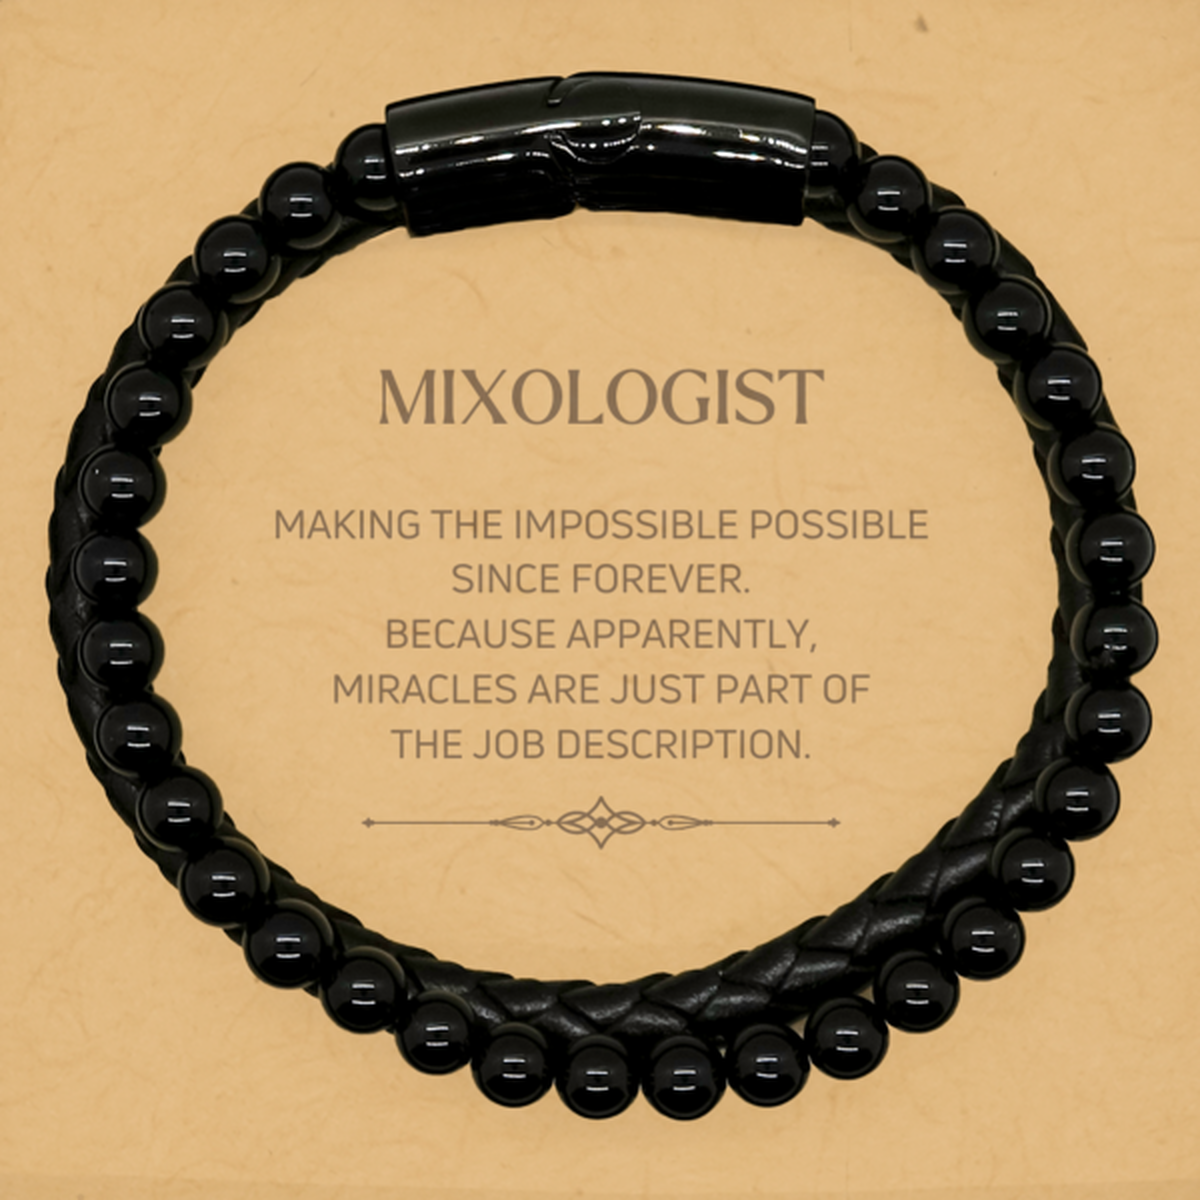 Funny Mixologist Gifts, Miracles are just part of the job description, Inspirational Birthday Stone Leather Bracelets For Mixologist, Men, Women, Coworkers, Friends, Boss